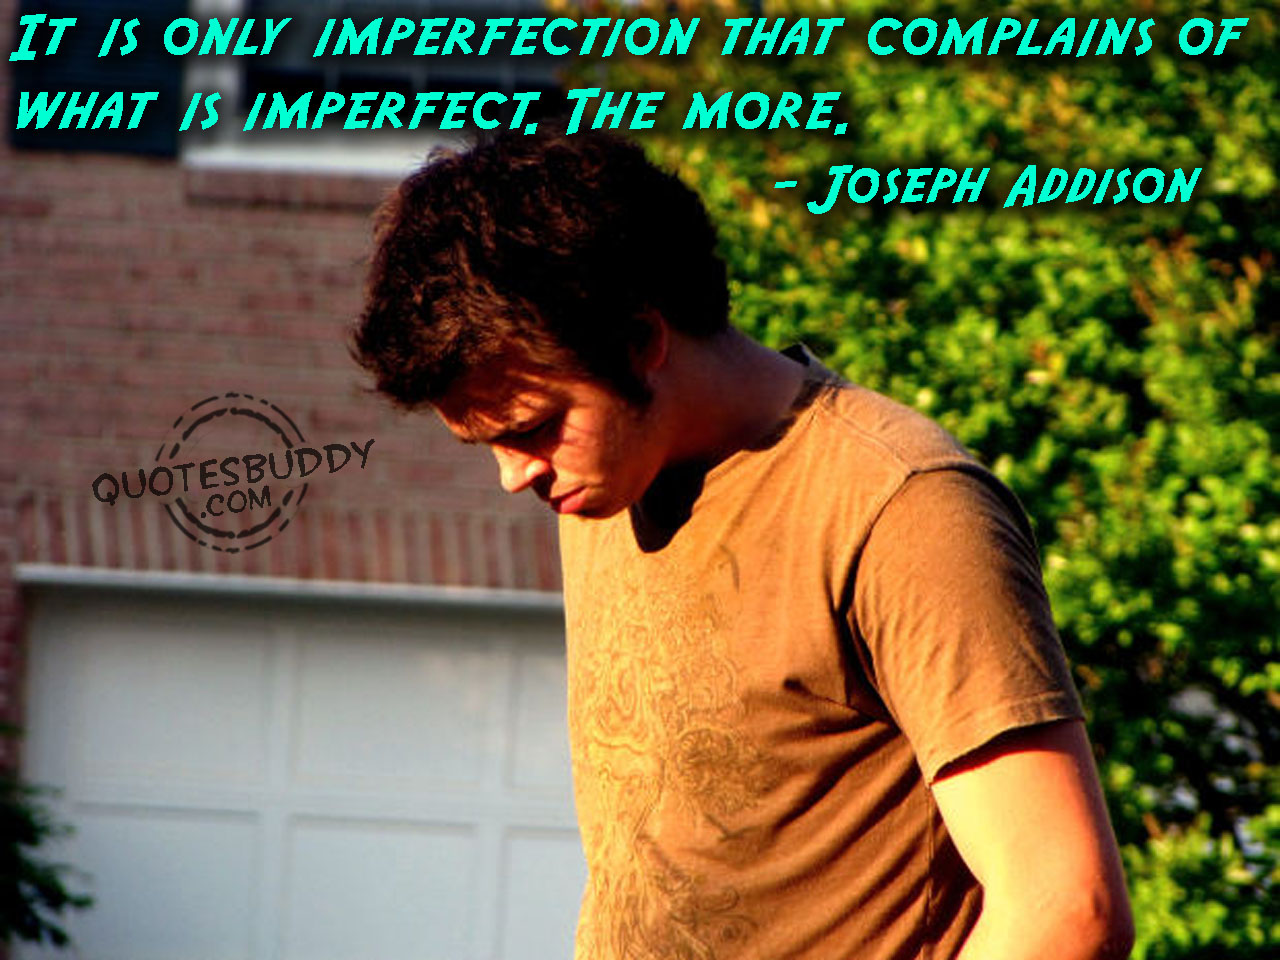 It is only imperfection that complains of what is imperfect. The more. Joseph Addison